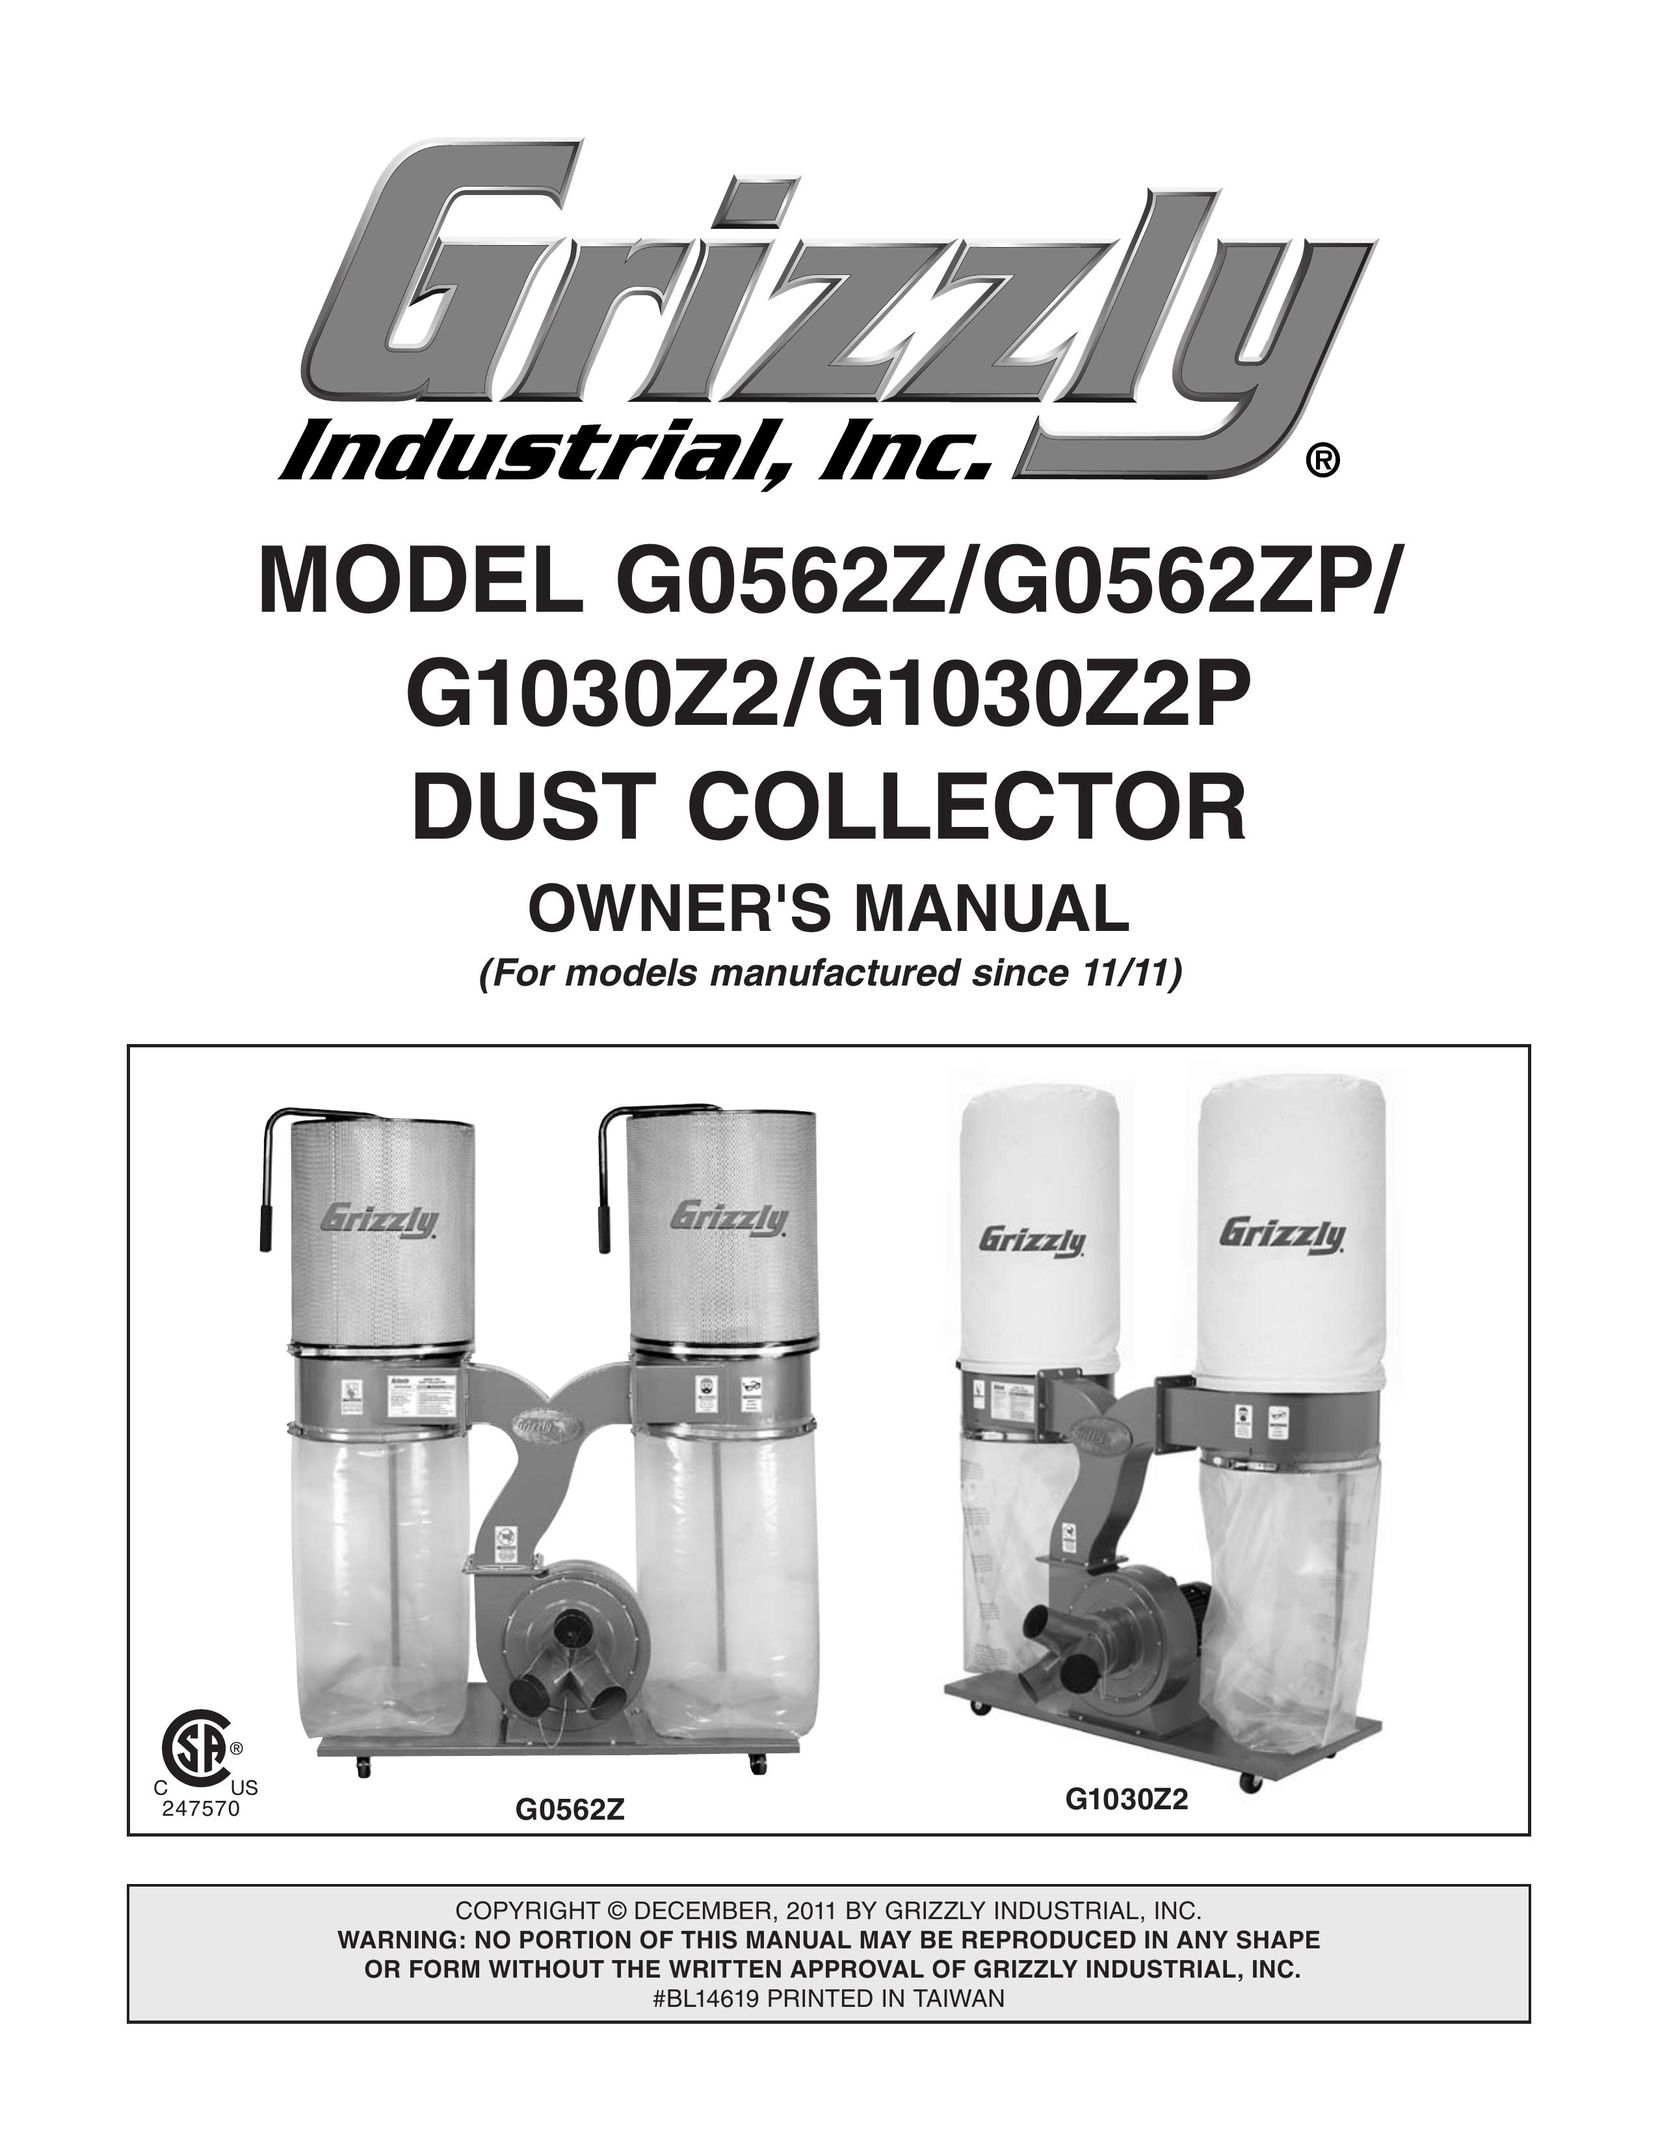 Grizzly G0562z Dust Collector User Manual